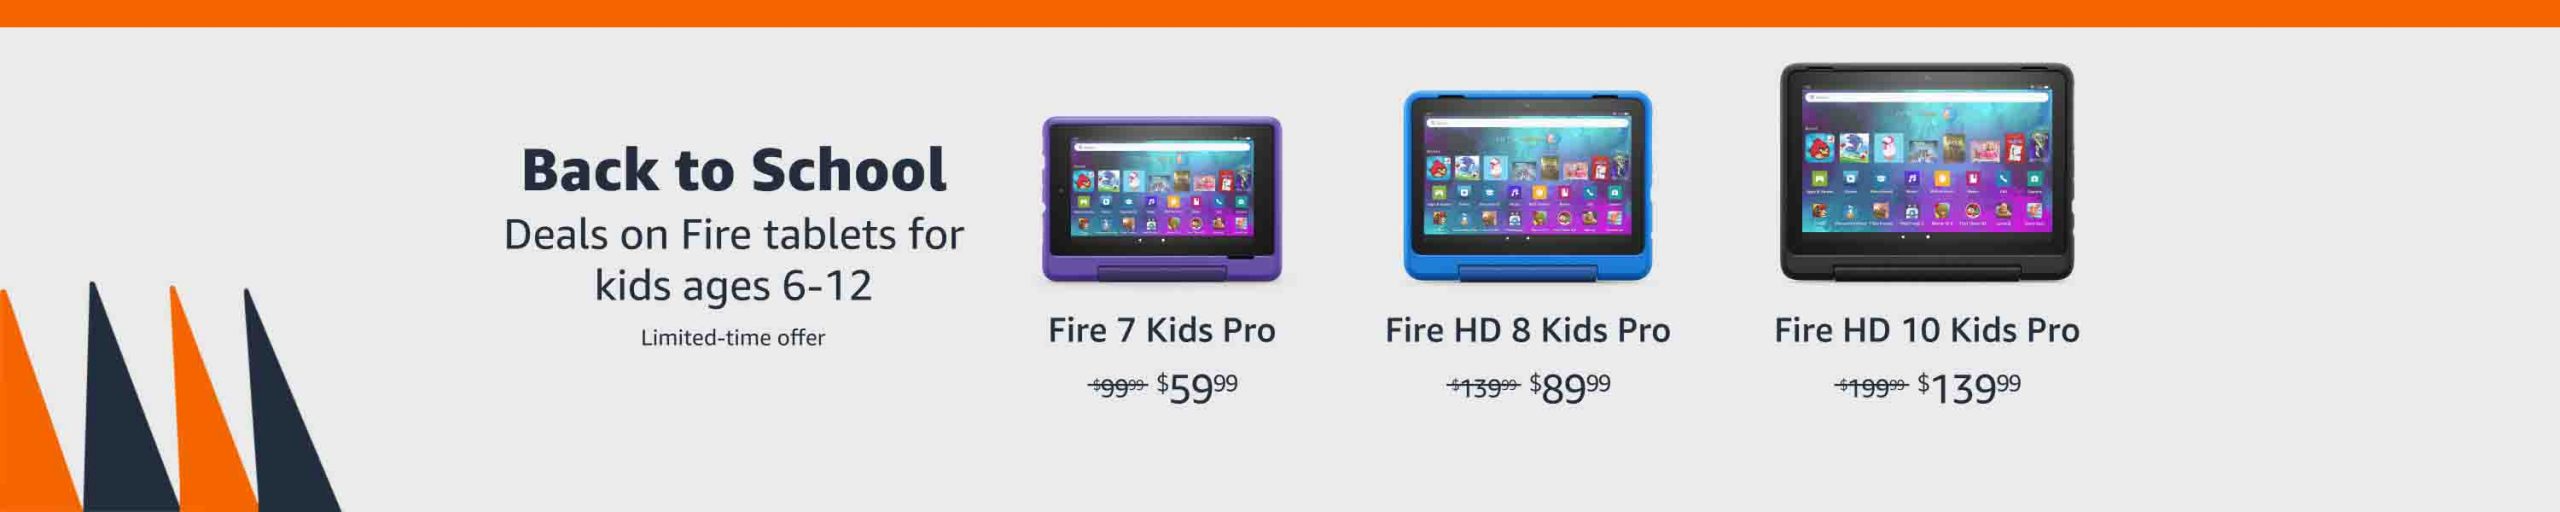 Fire tablets promos